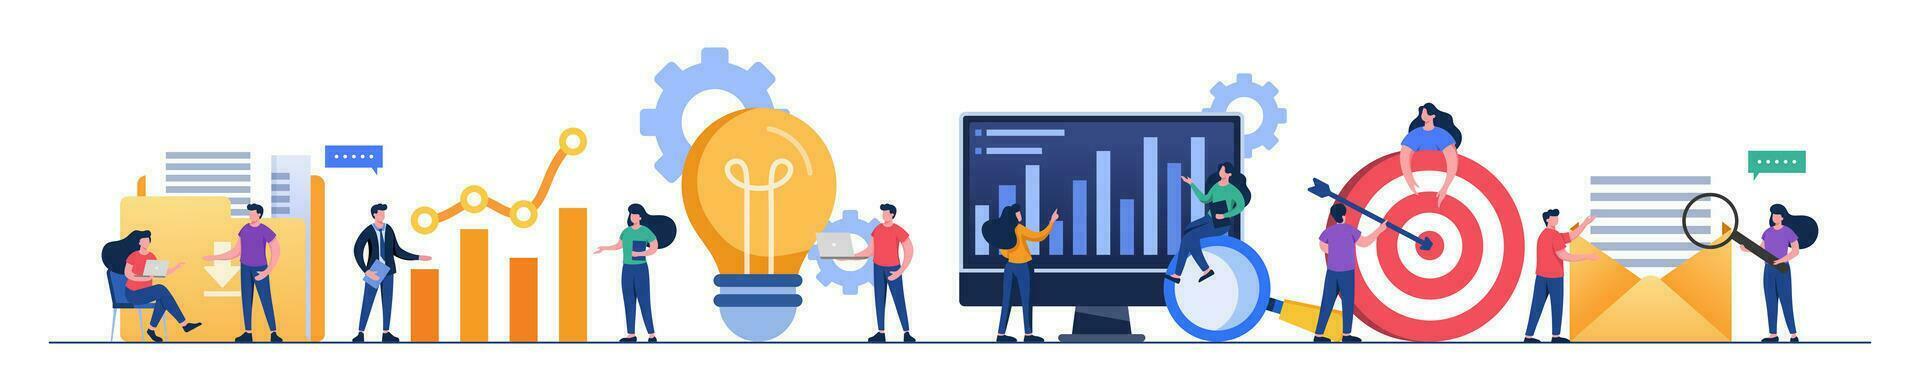 Business performance data analysis flat illustration concept, Search engine optimization, Market research chart, Data Analytics, Financial report, Business strategy, Financial forecast vector